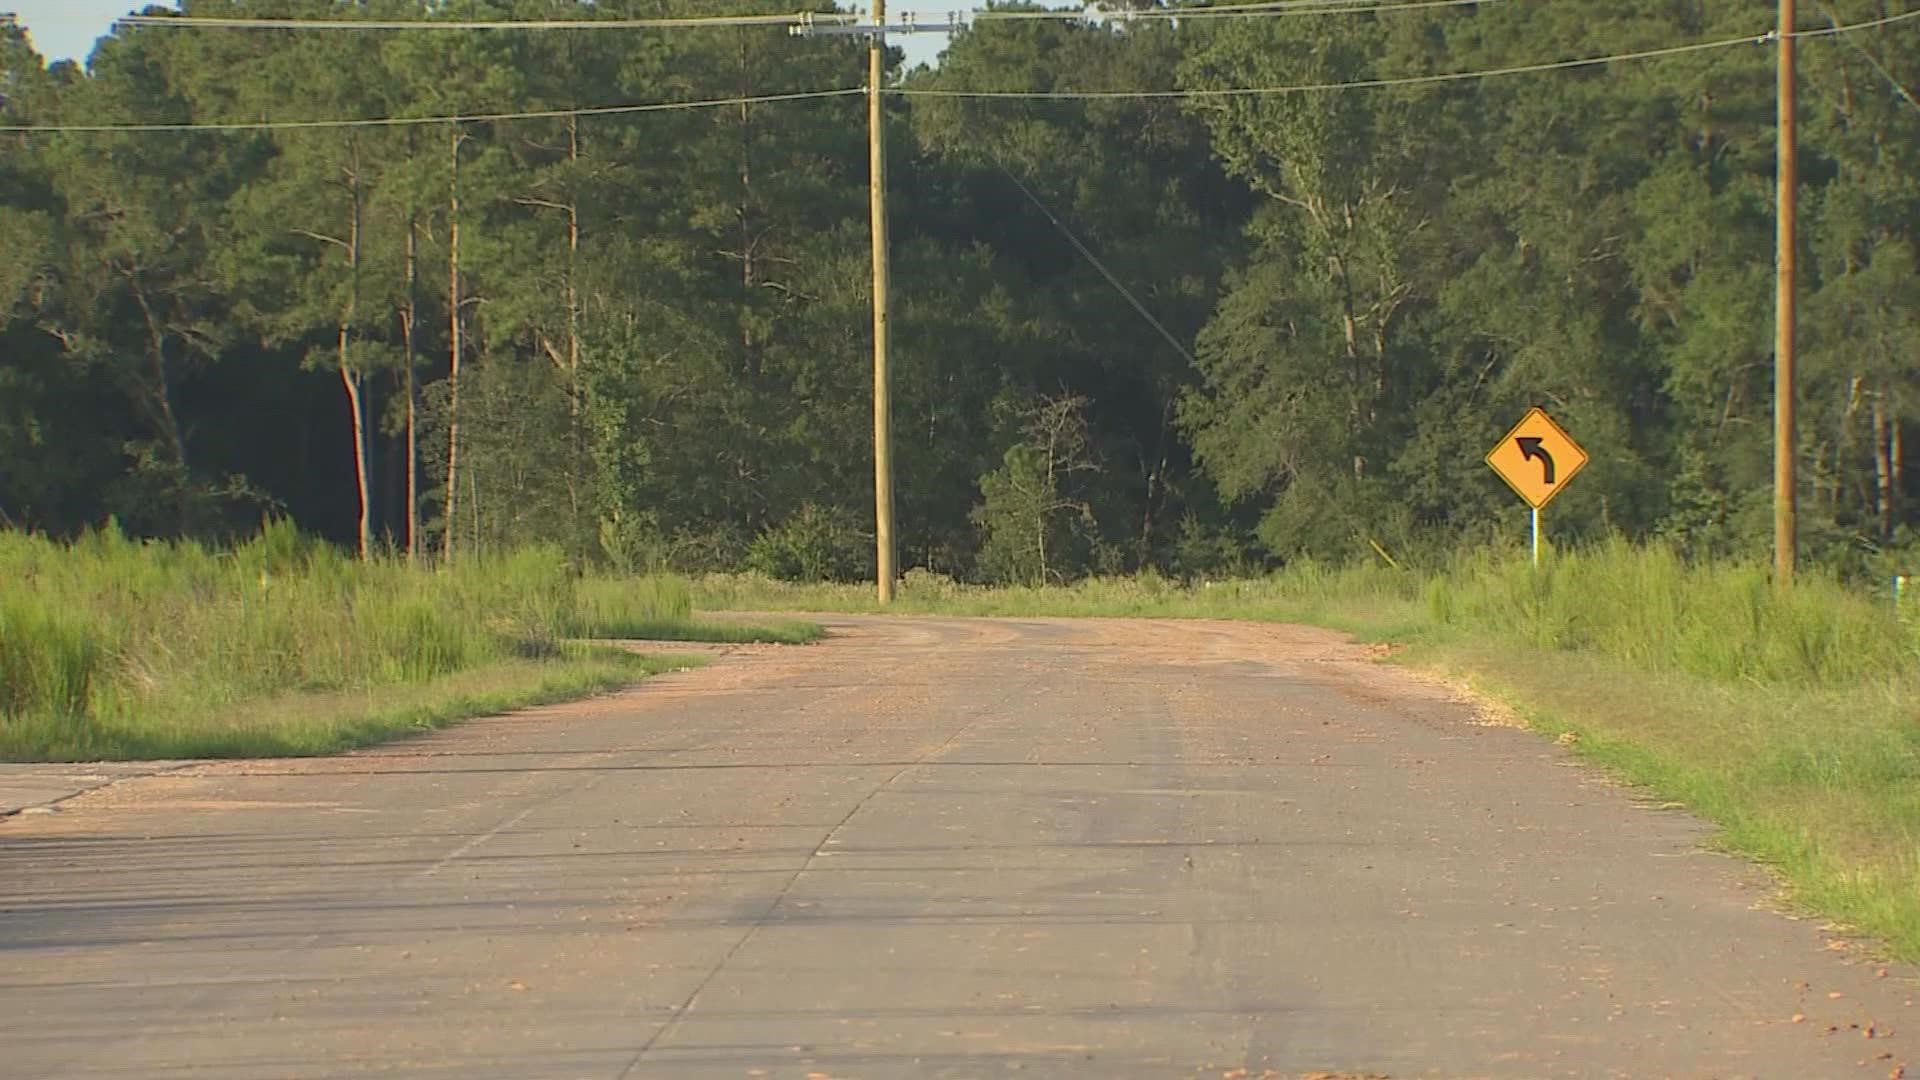 KHOU 11 is learning more about a 16-year-old girl who was found shot to death and dumped on the side of a rural road in Liberty County.